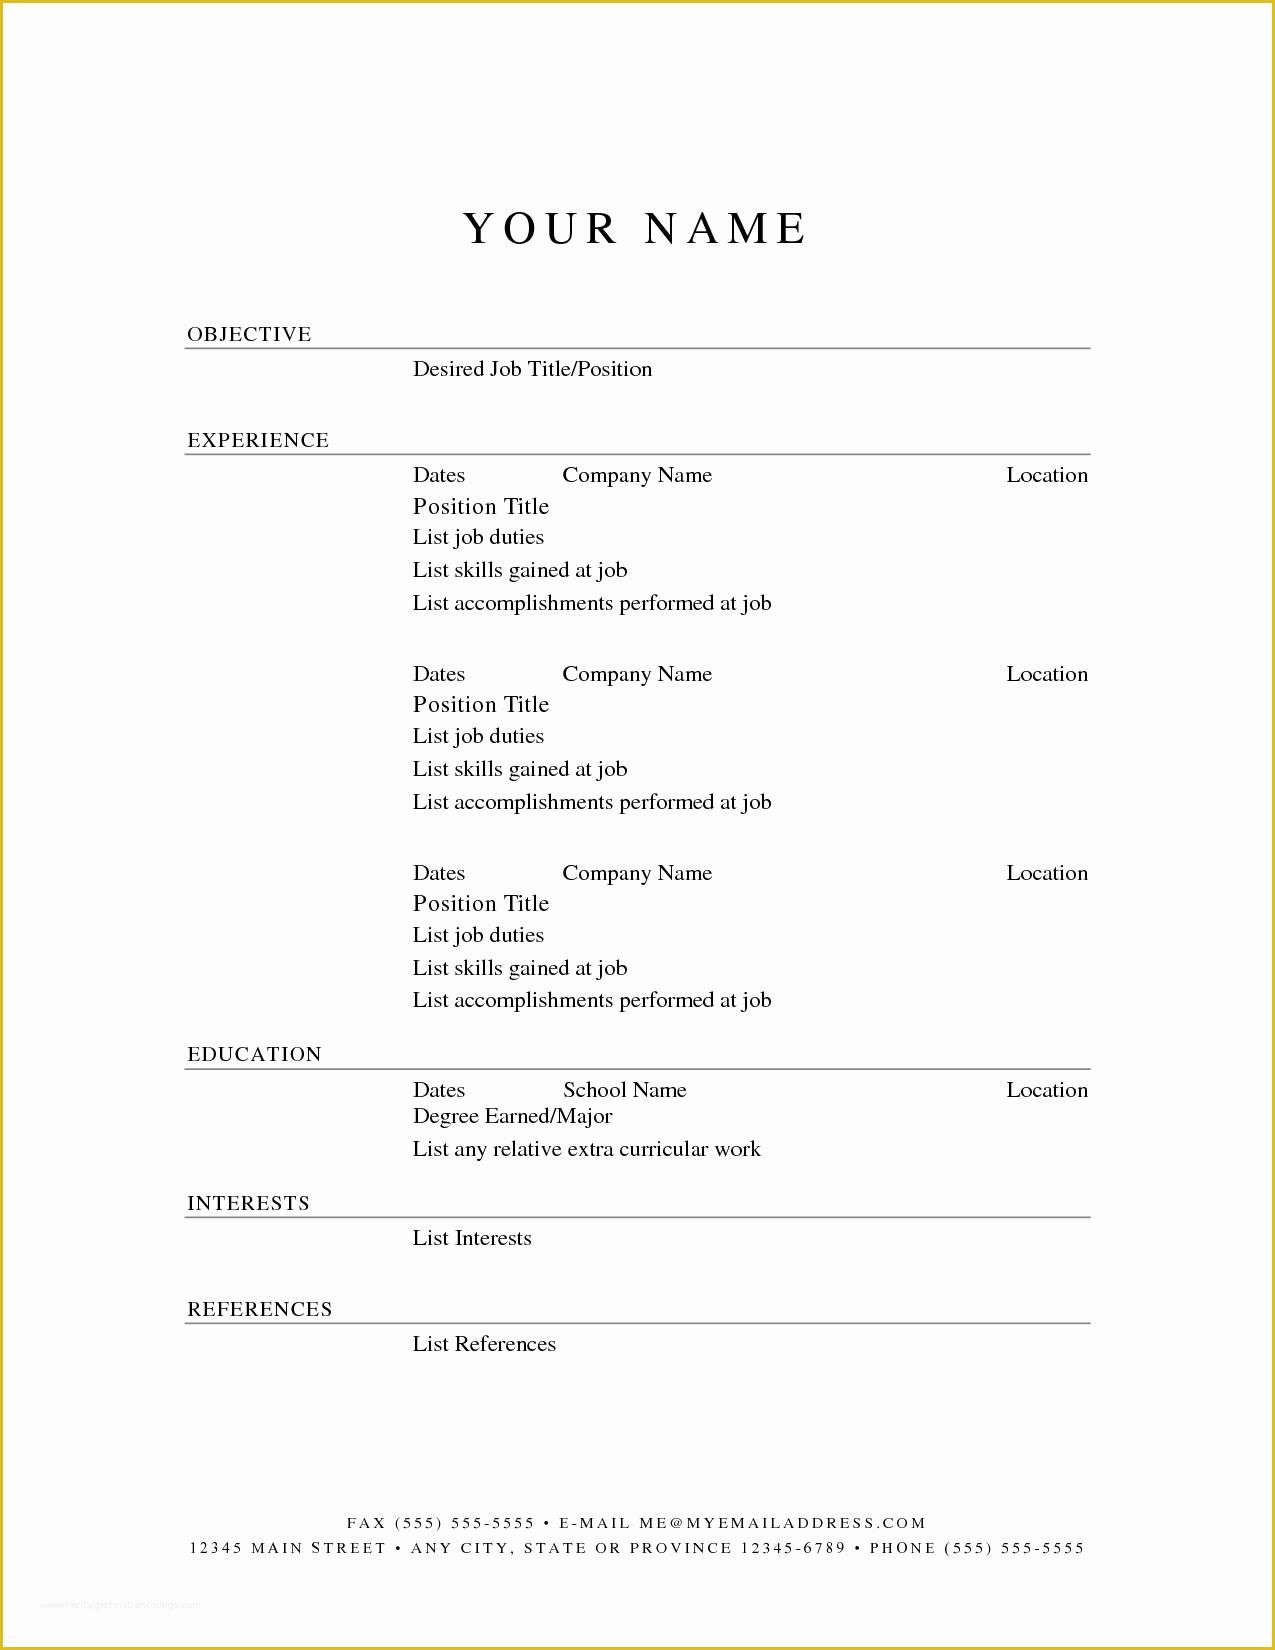 Free Resume Wizard Templates Of Ms Word Resume Wizard Microsoft Templates Resume Wizard